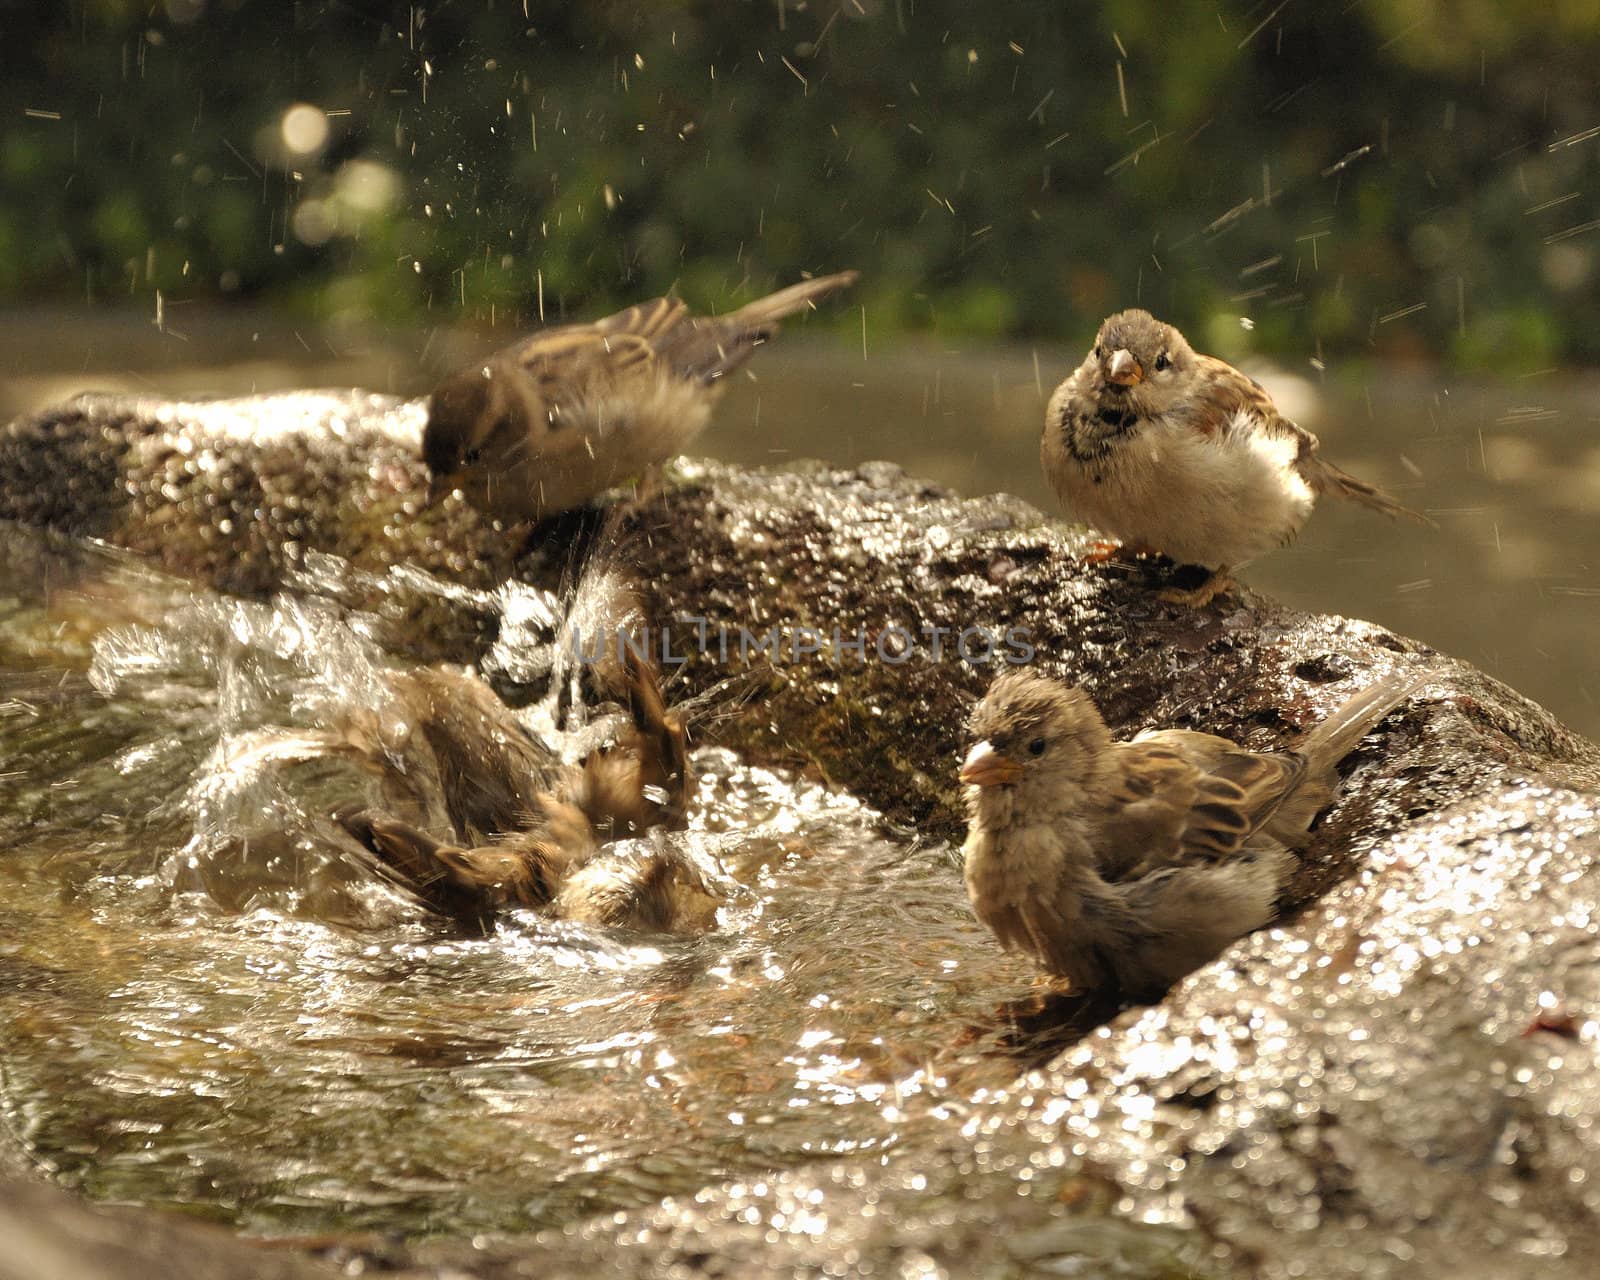 Birds taking a bath. During summer in rock fountain. Happy and fun.
